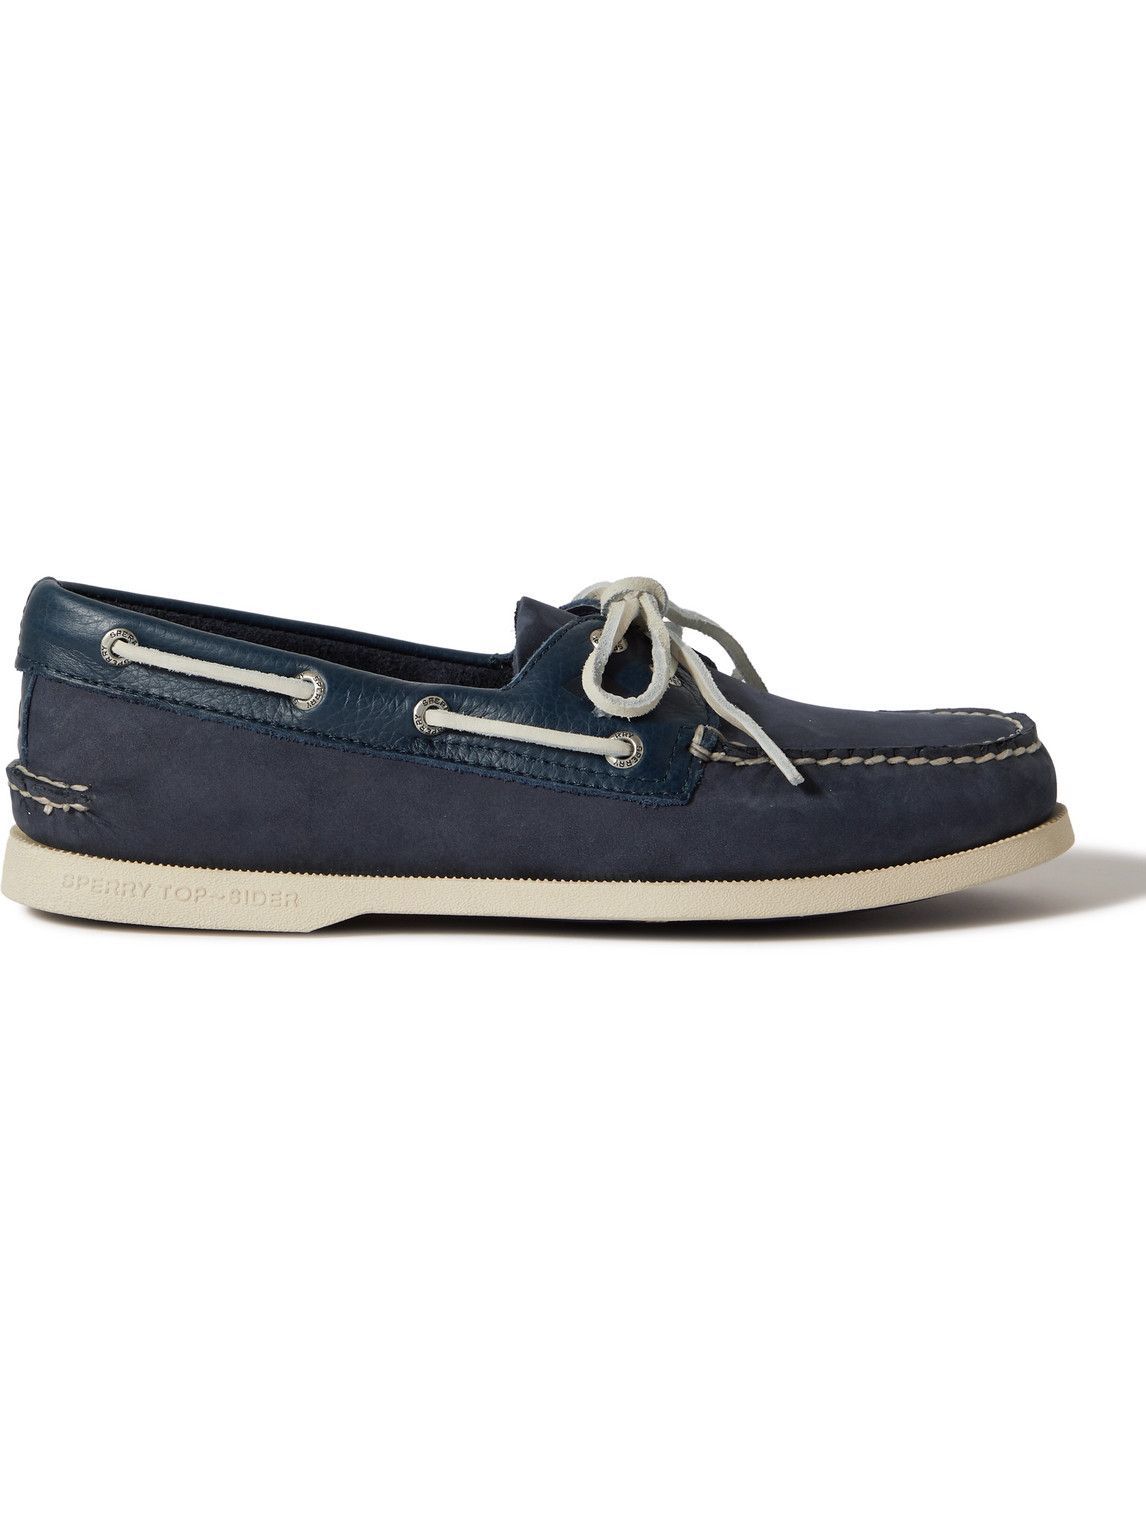 Sperry - Authentic Original Leather-Trimmed Nubuck Boat Shoes - Blue ...